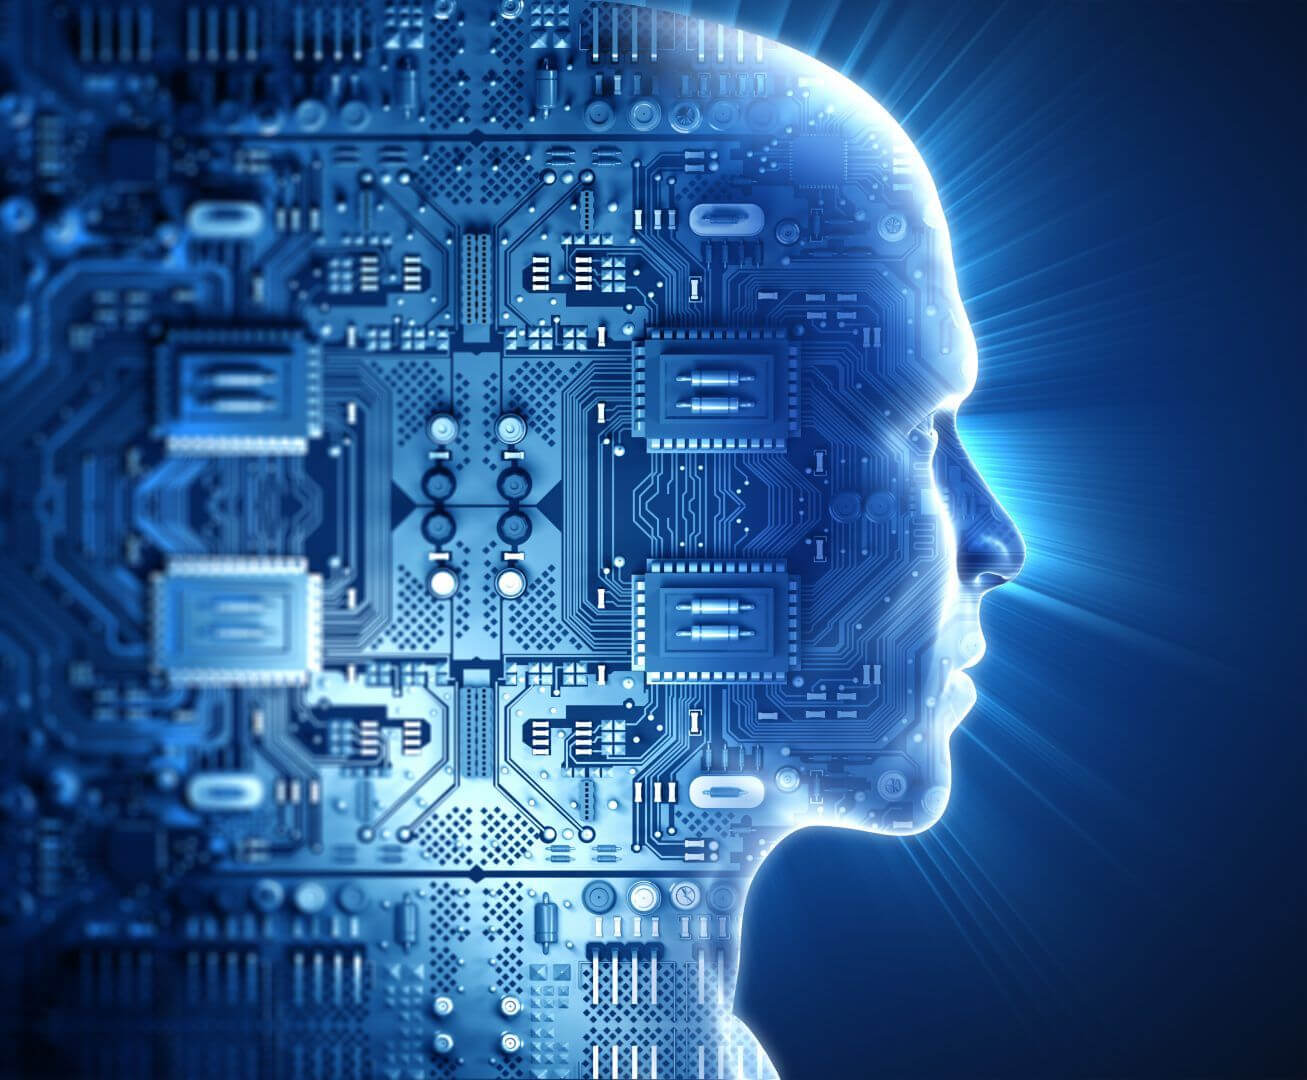 Weekend Open Forum: Will AI benefit humanity or could it doom us all?